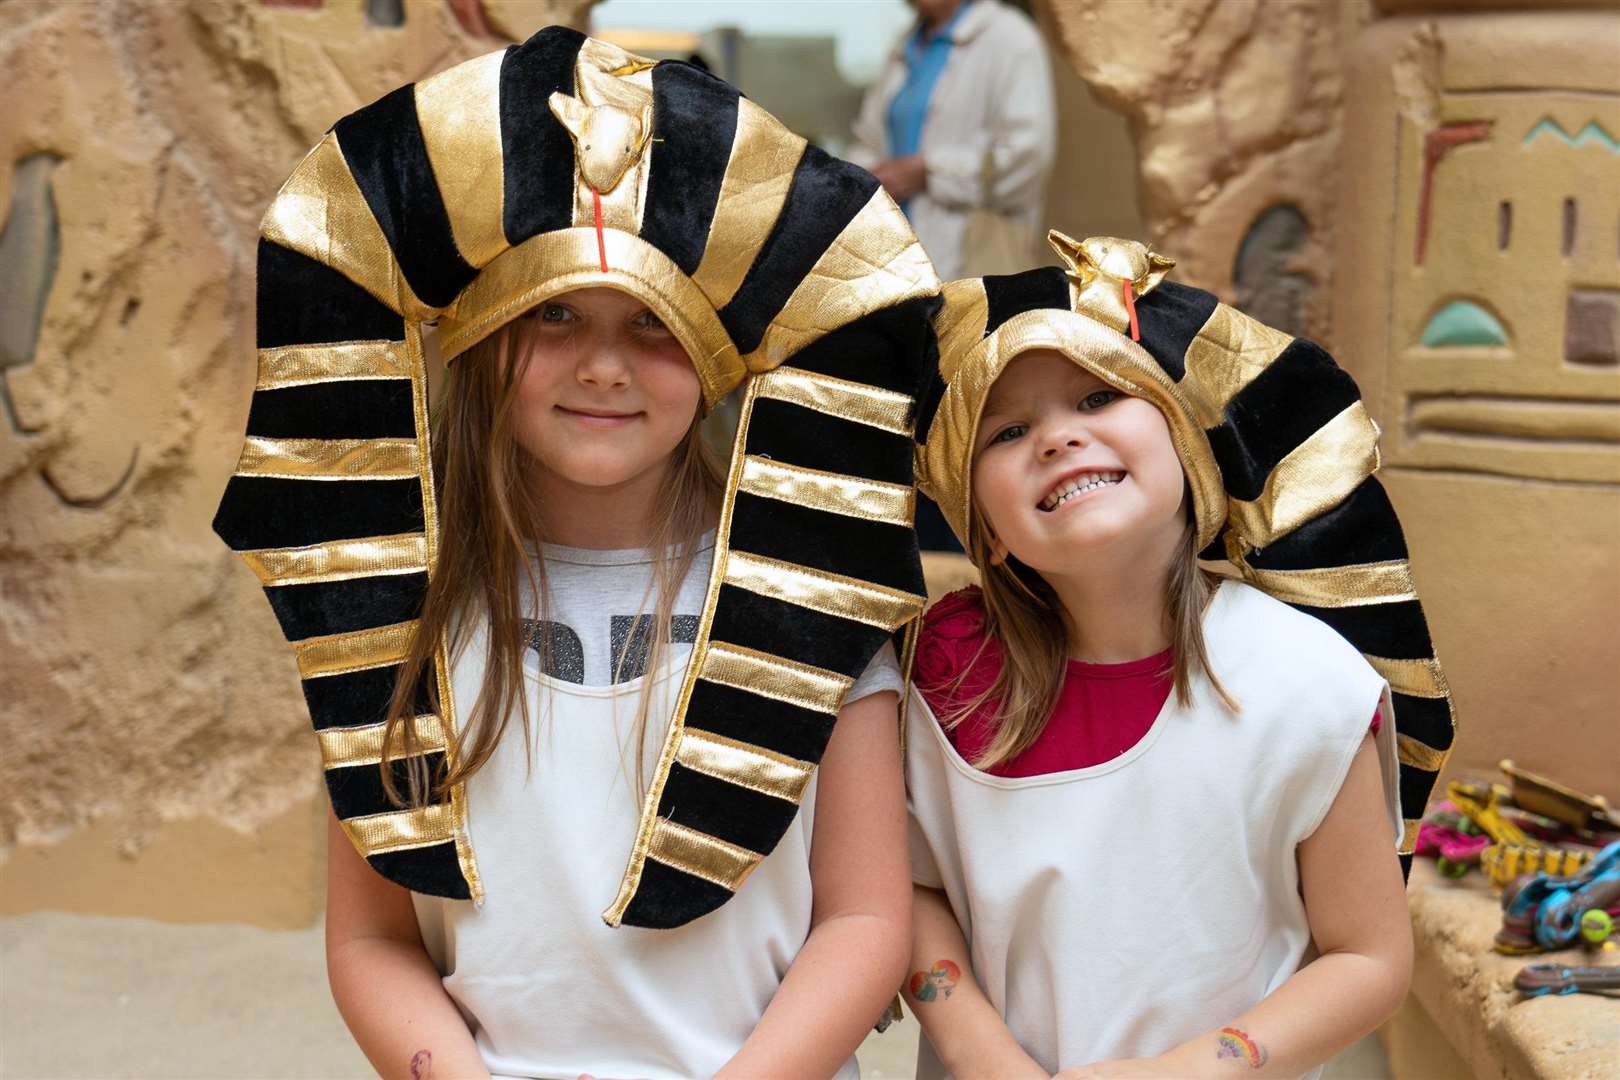 There's free fun to be had at the ancient Egyptian experience at the Royal Victoria Place shopping centre